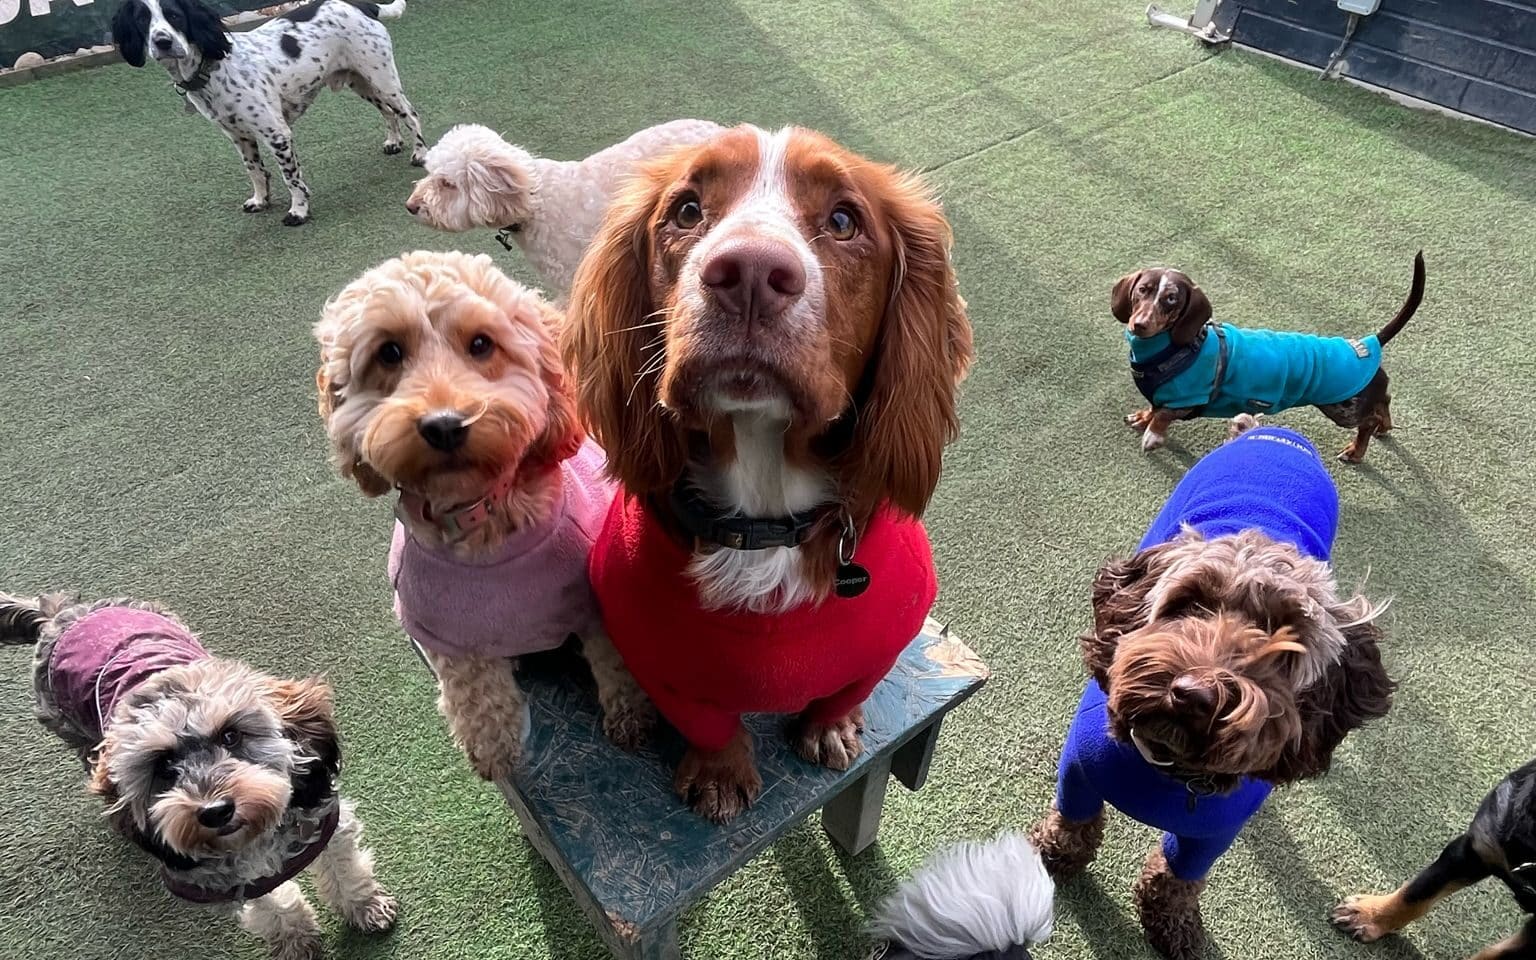 doggy daycare activities - dogs socialising